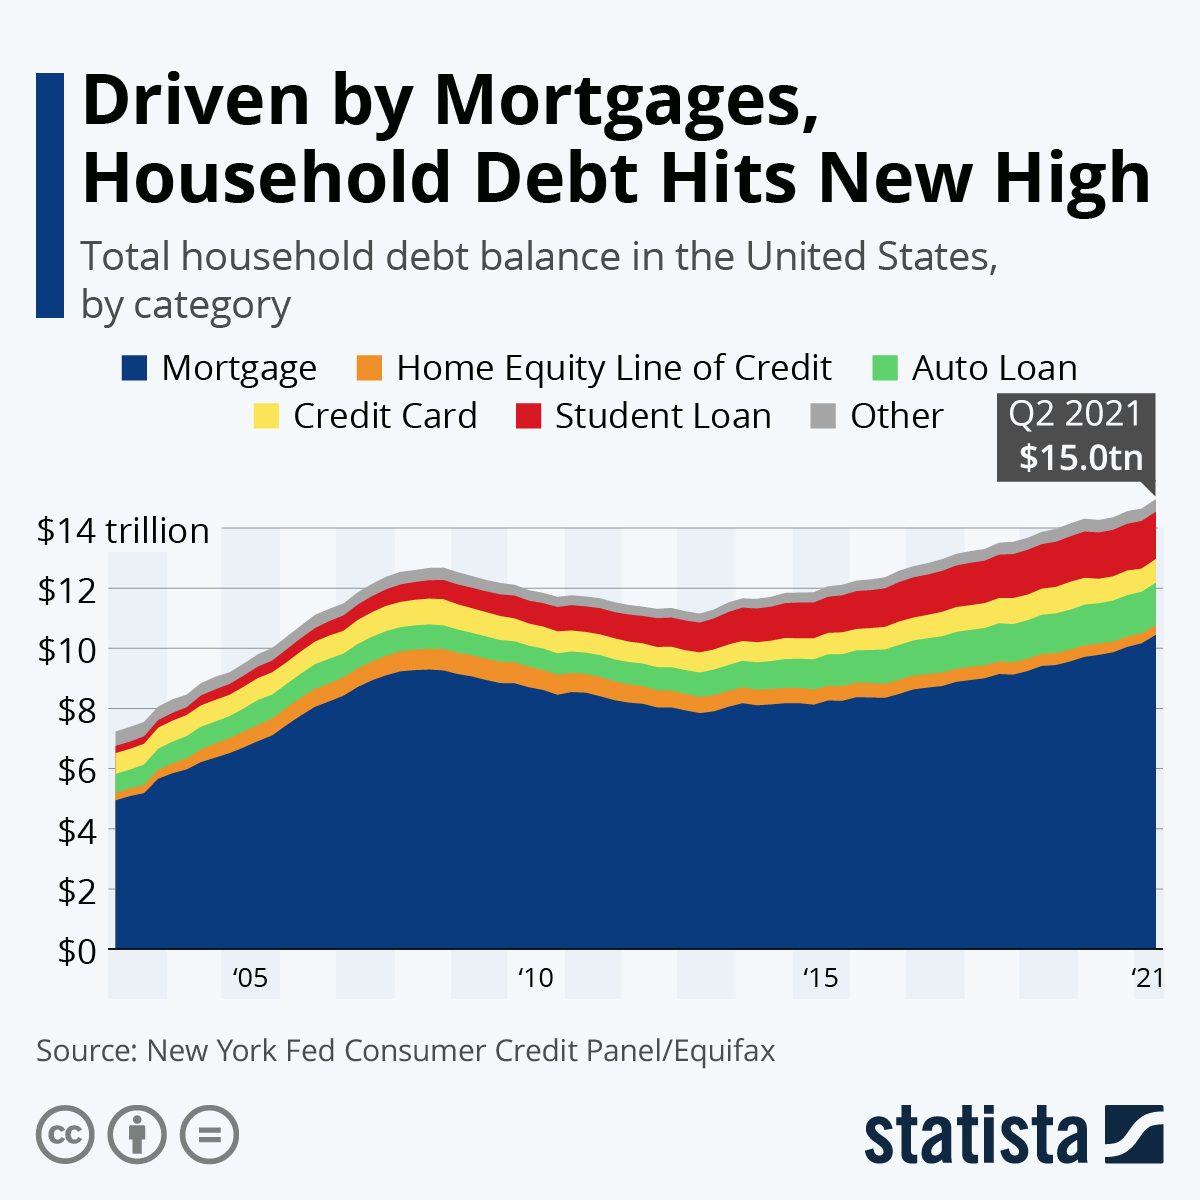 Driven by Mortgages, U.S. Household Debt Hits New High